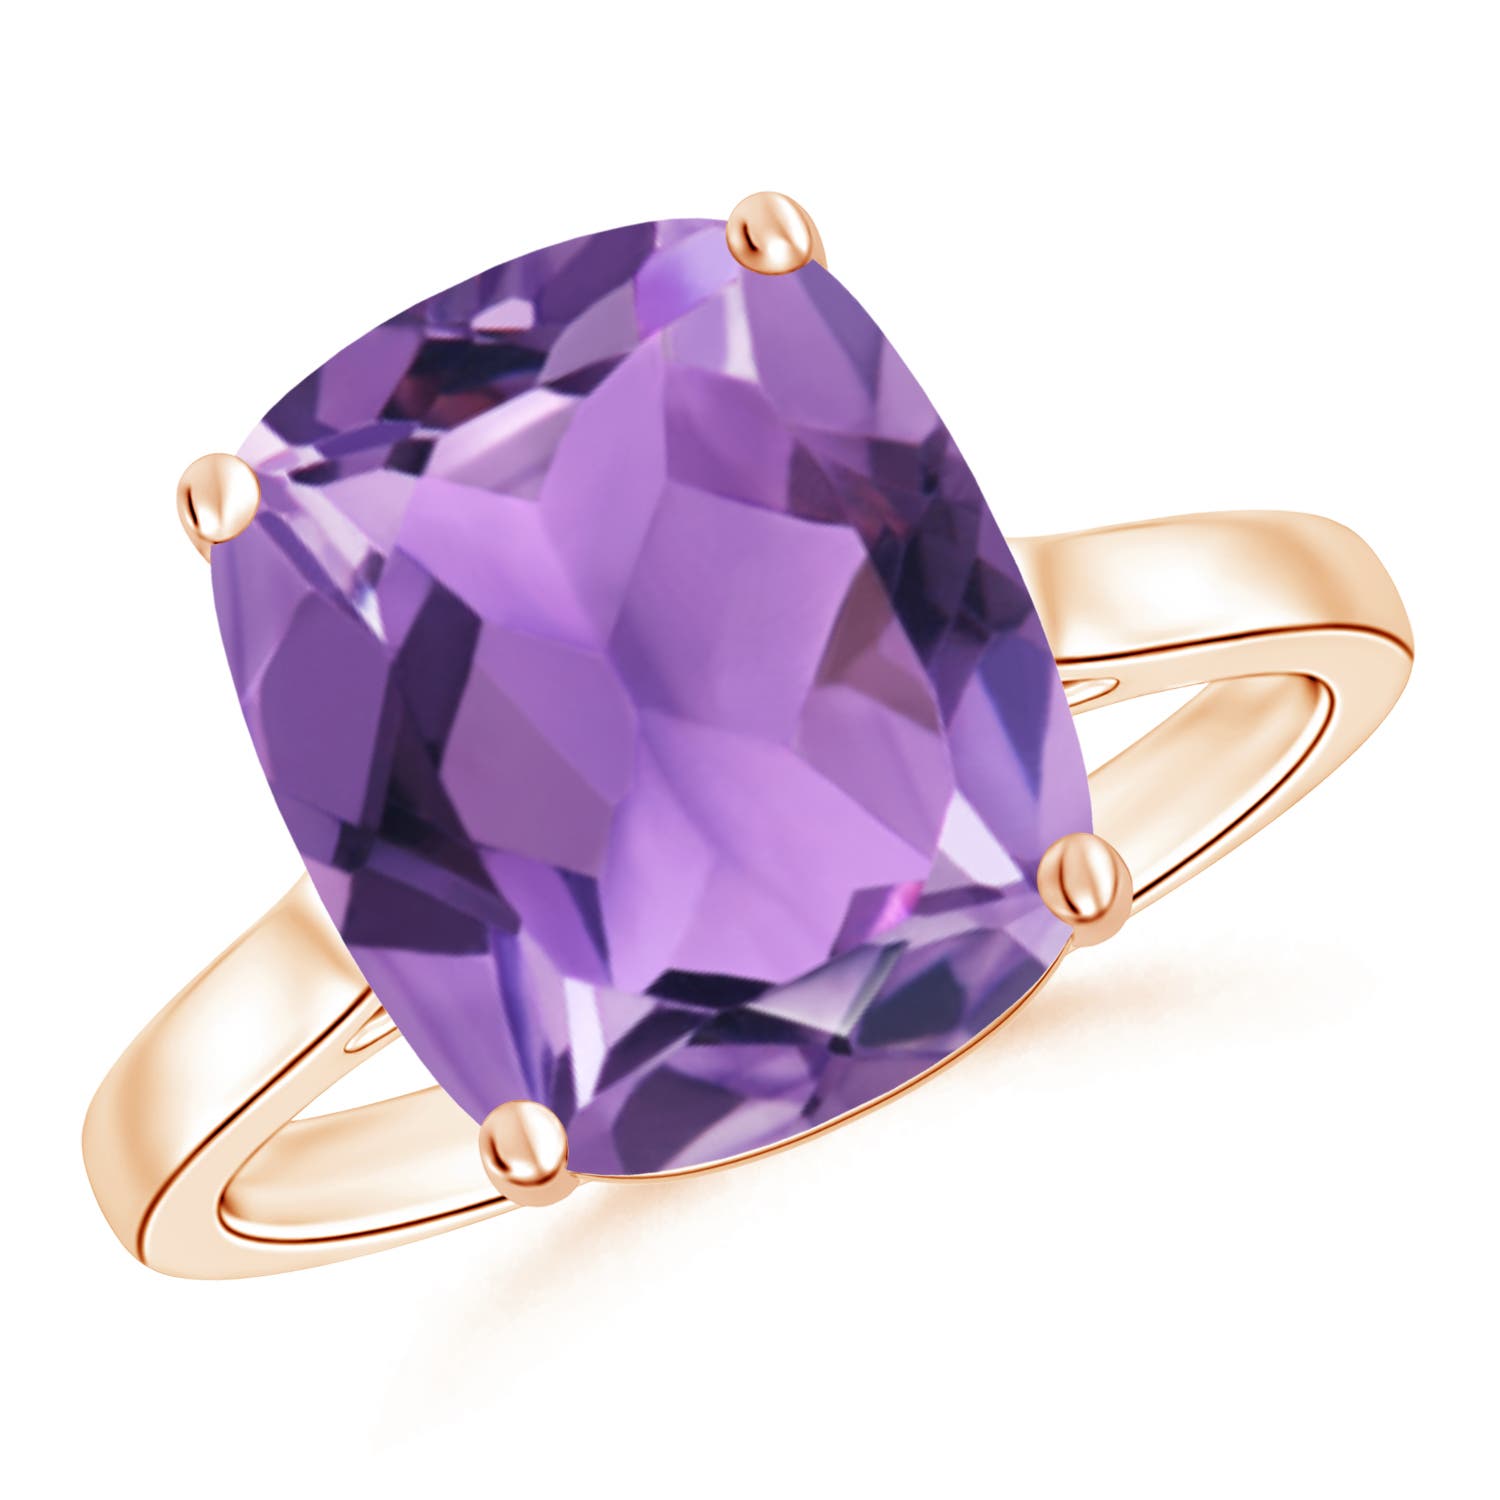 AA - Amethyst / 4.64 CT / 14 KT Rose Gold